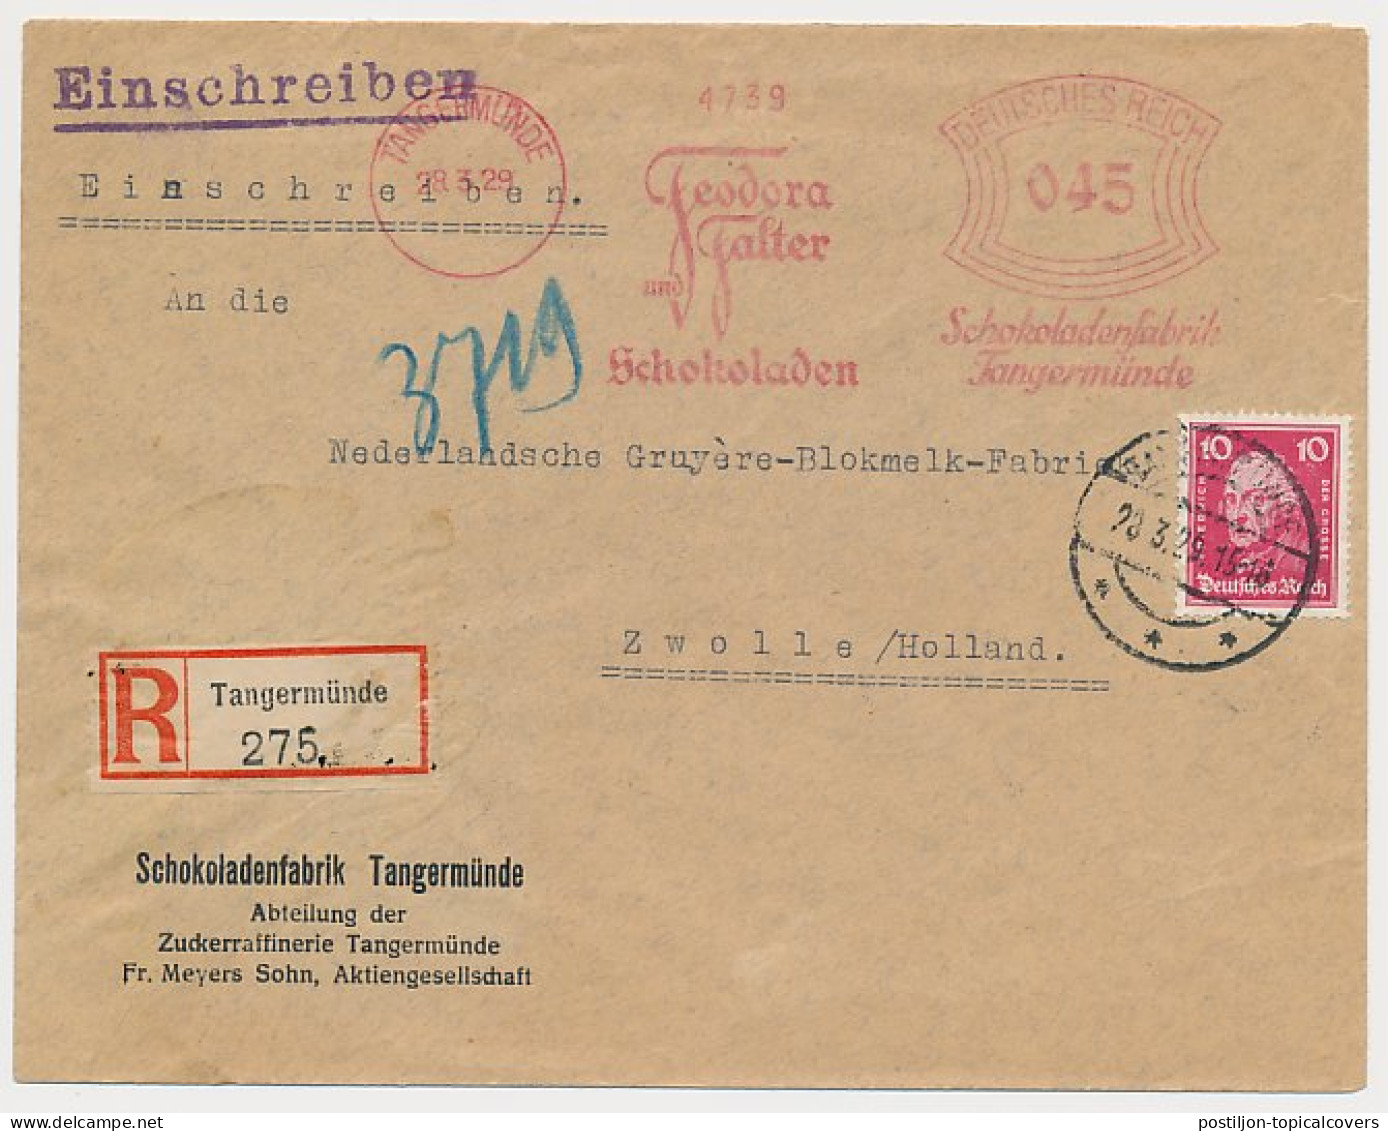 Registered Meter Cover Deutsches Reich / Germany 1929 Chocolate Factory - Food